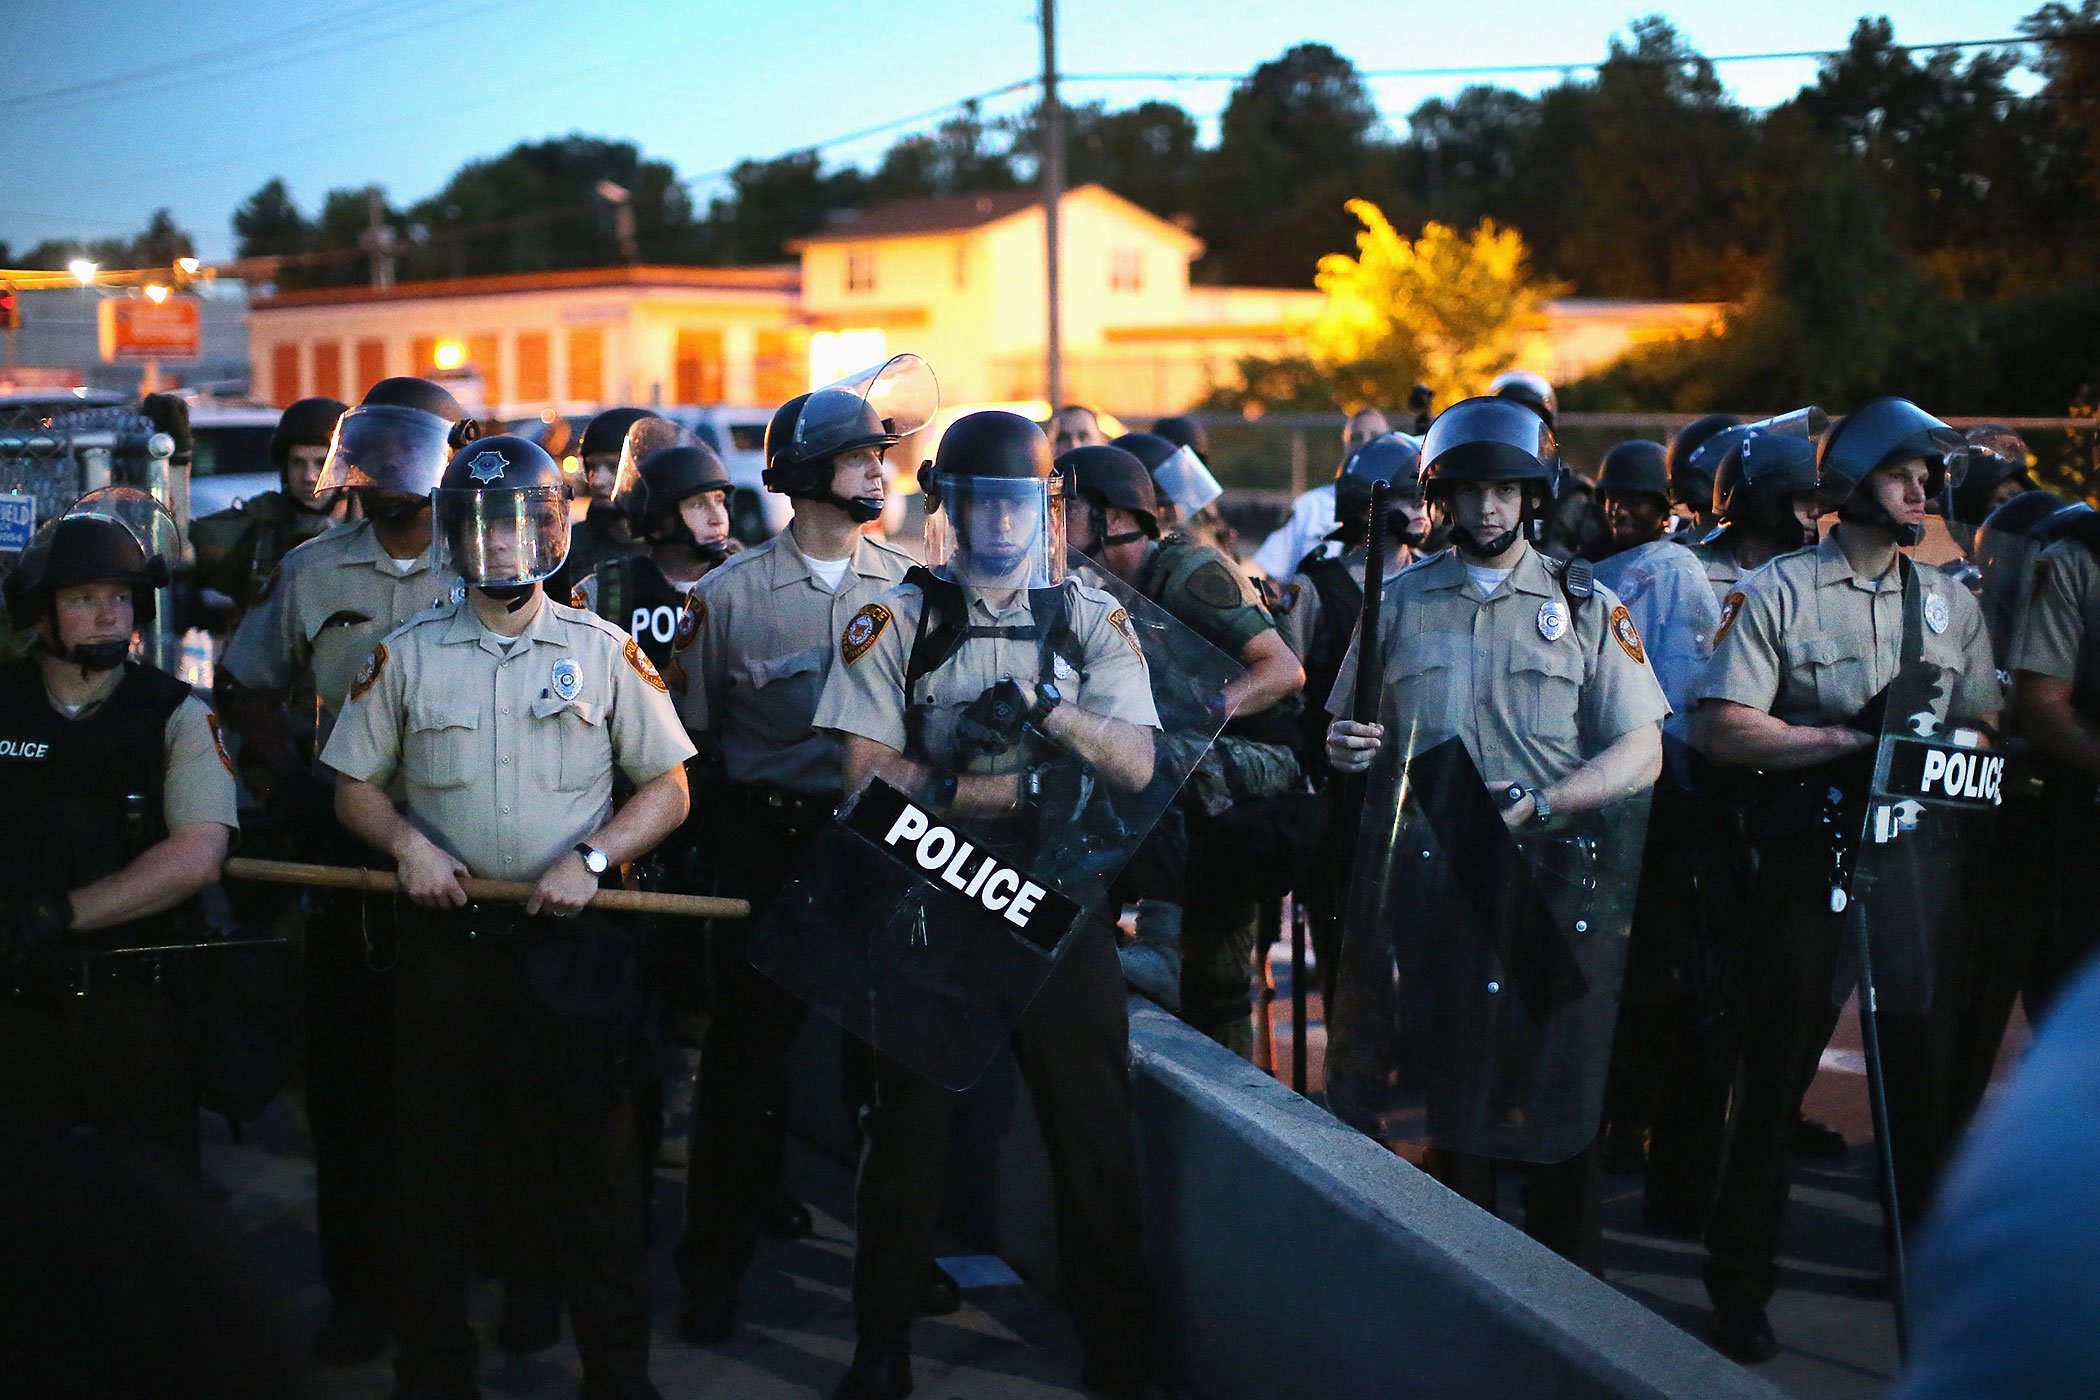 Police stand watch as demonstrators protest the shooting death of teenager Michael Brown on August 13, 2014 in Ferguson, Missouri. (Scott Olson—Getty Images)